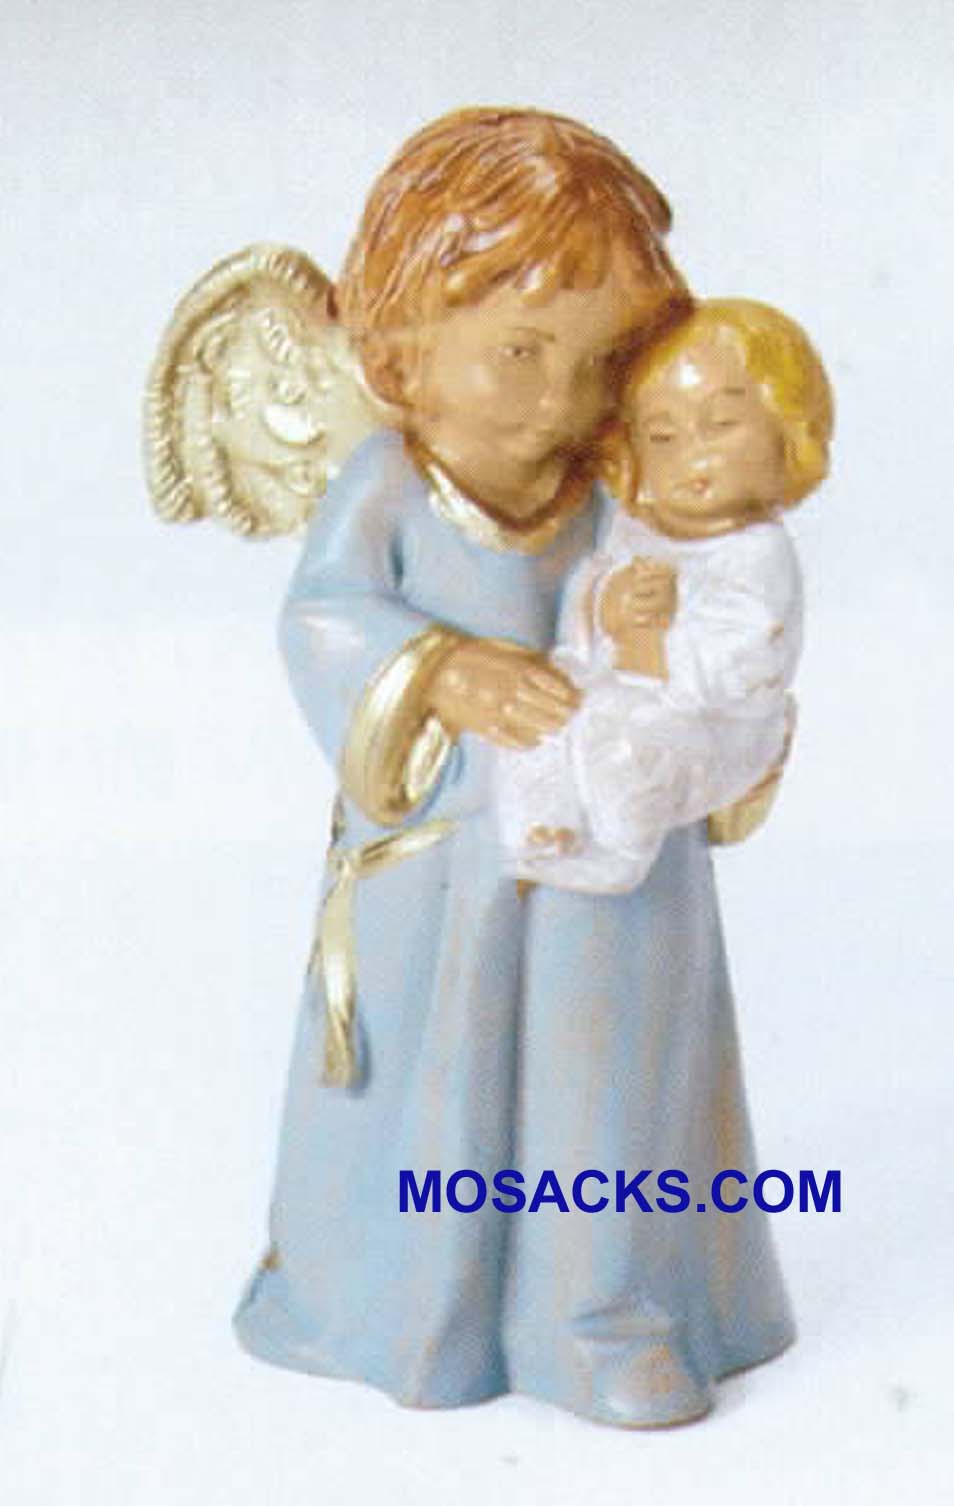 Fontanini 5" Angel Bless This Child Boy 20-65518 RETIRED & in stock